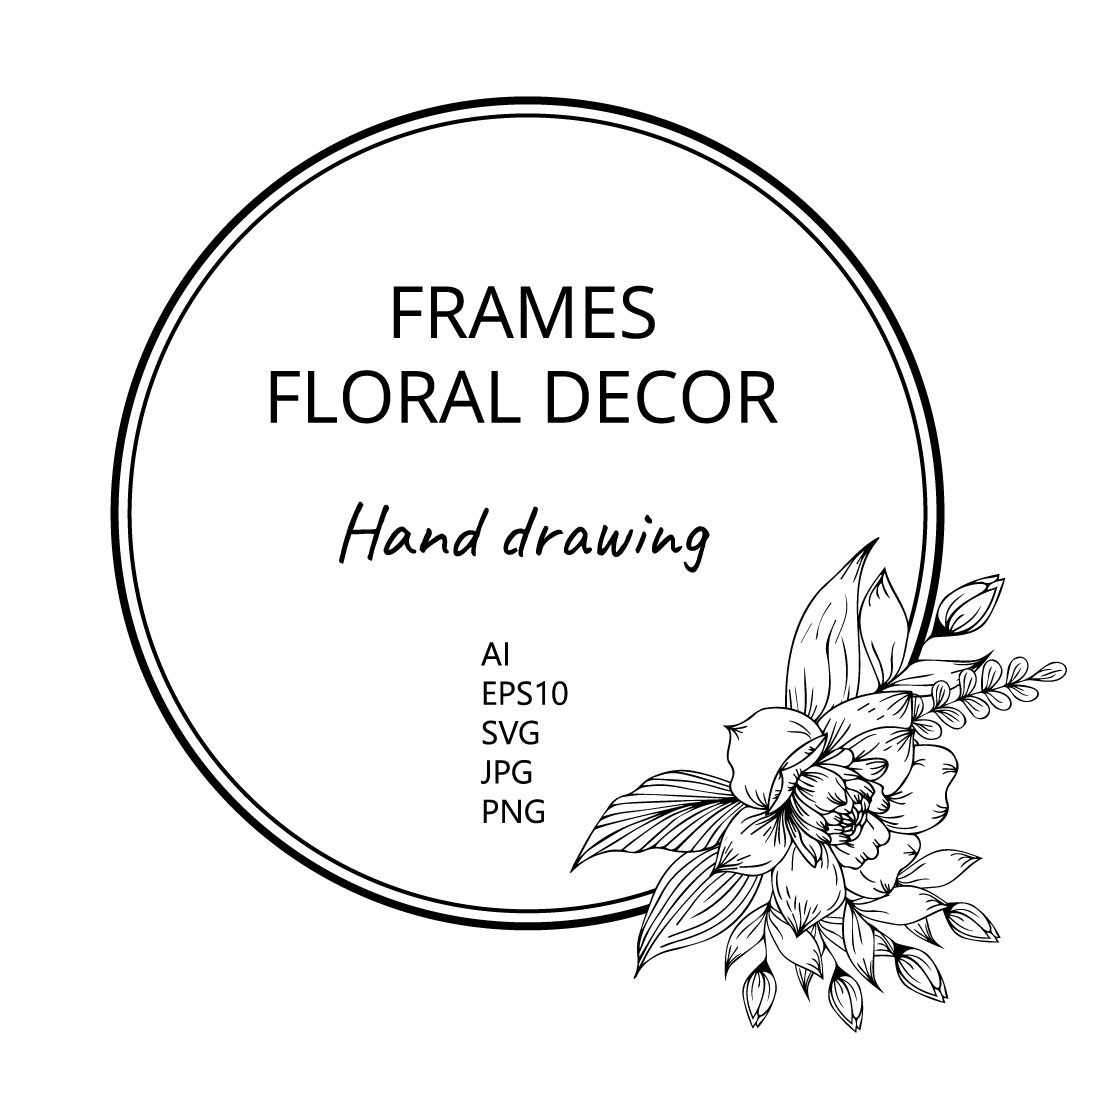 Two Frames with Floral Decor and Elements of Decor cover image.